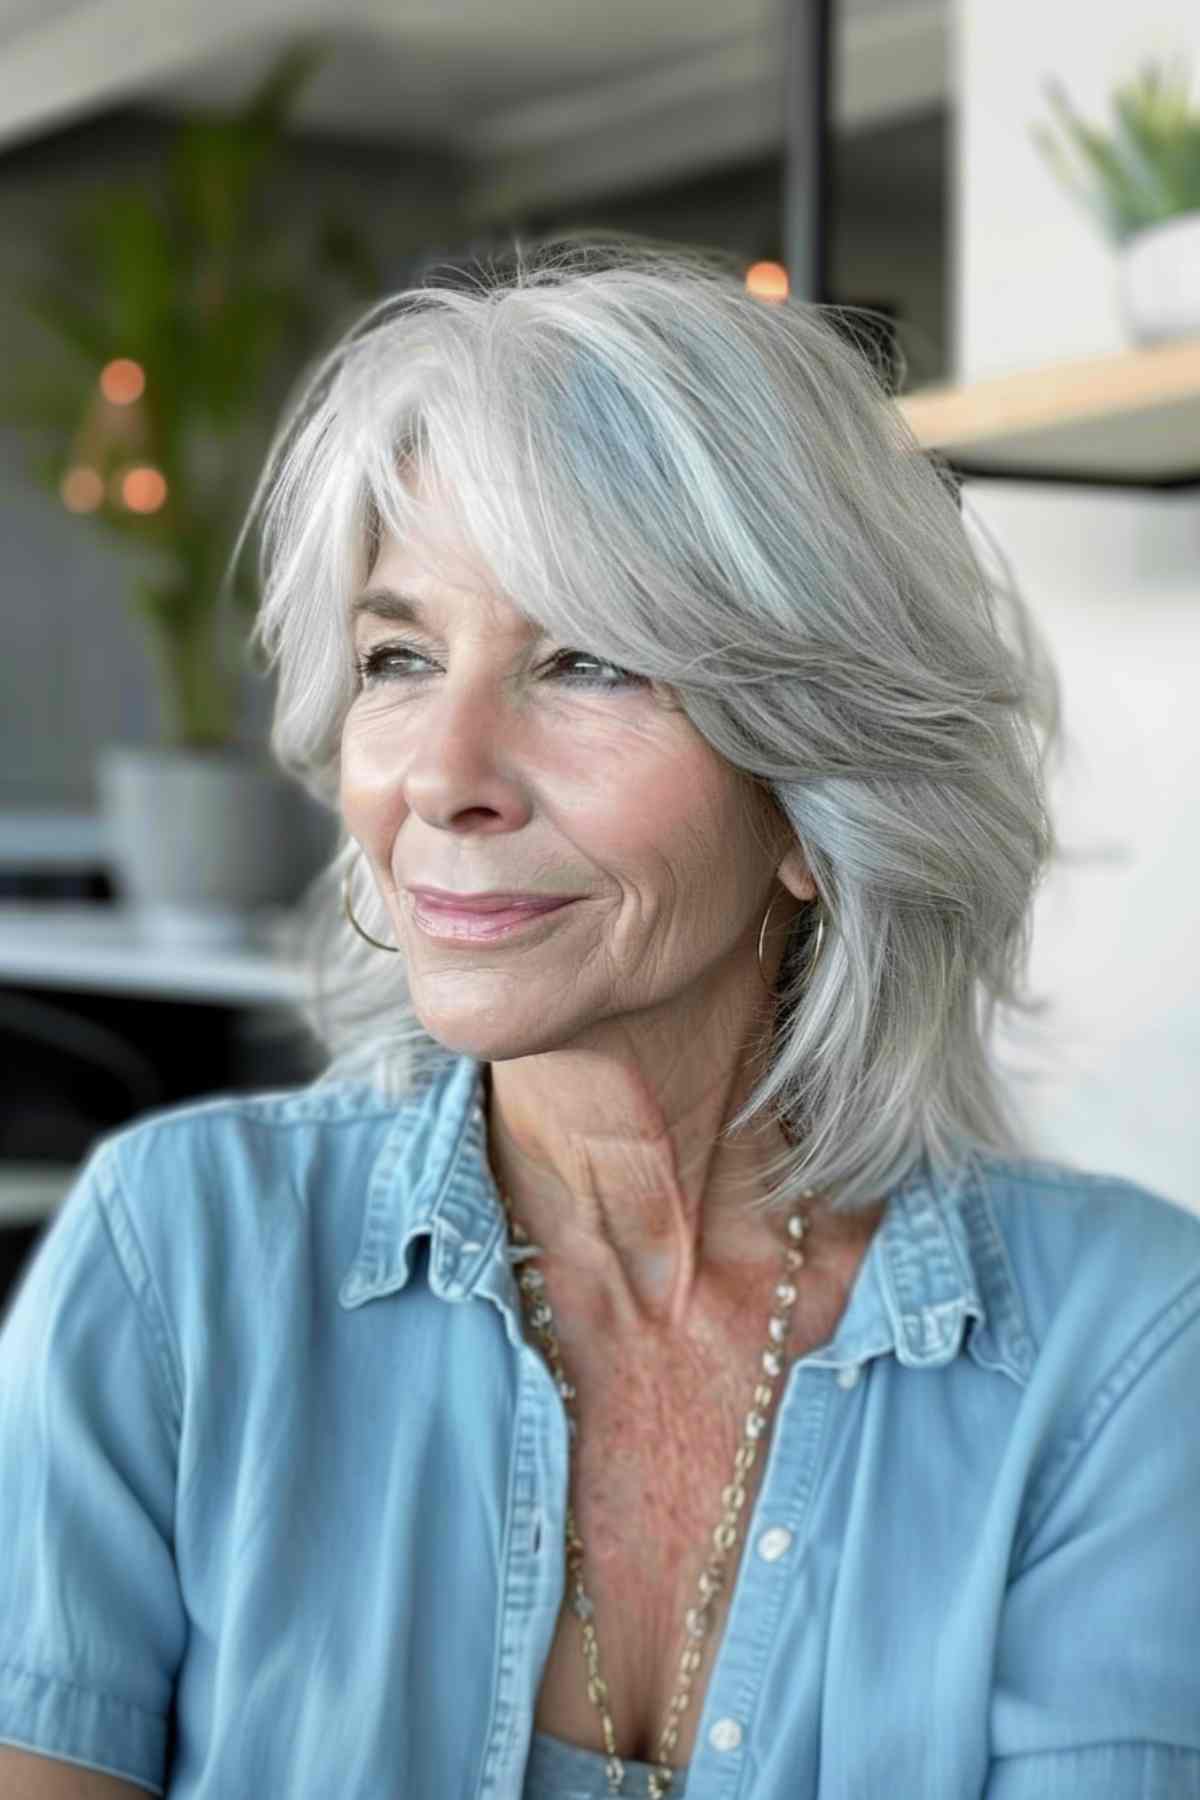 Elegant senior woman with a Wolf Cut, styled to provide a natural, voluminous look ideal for her age and hair type.